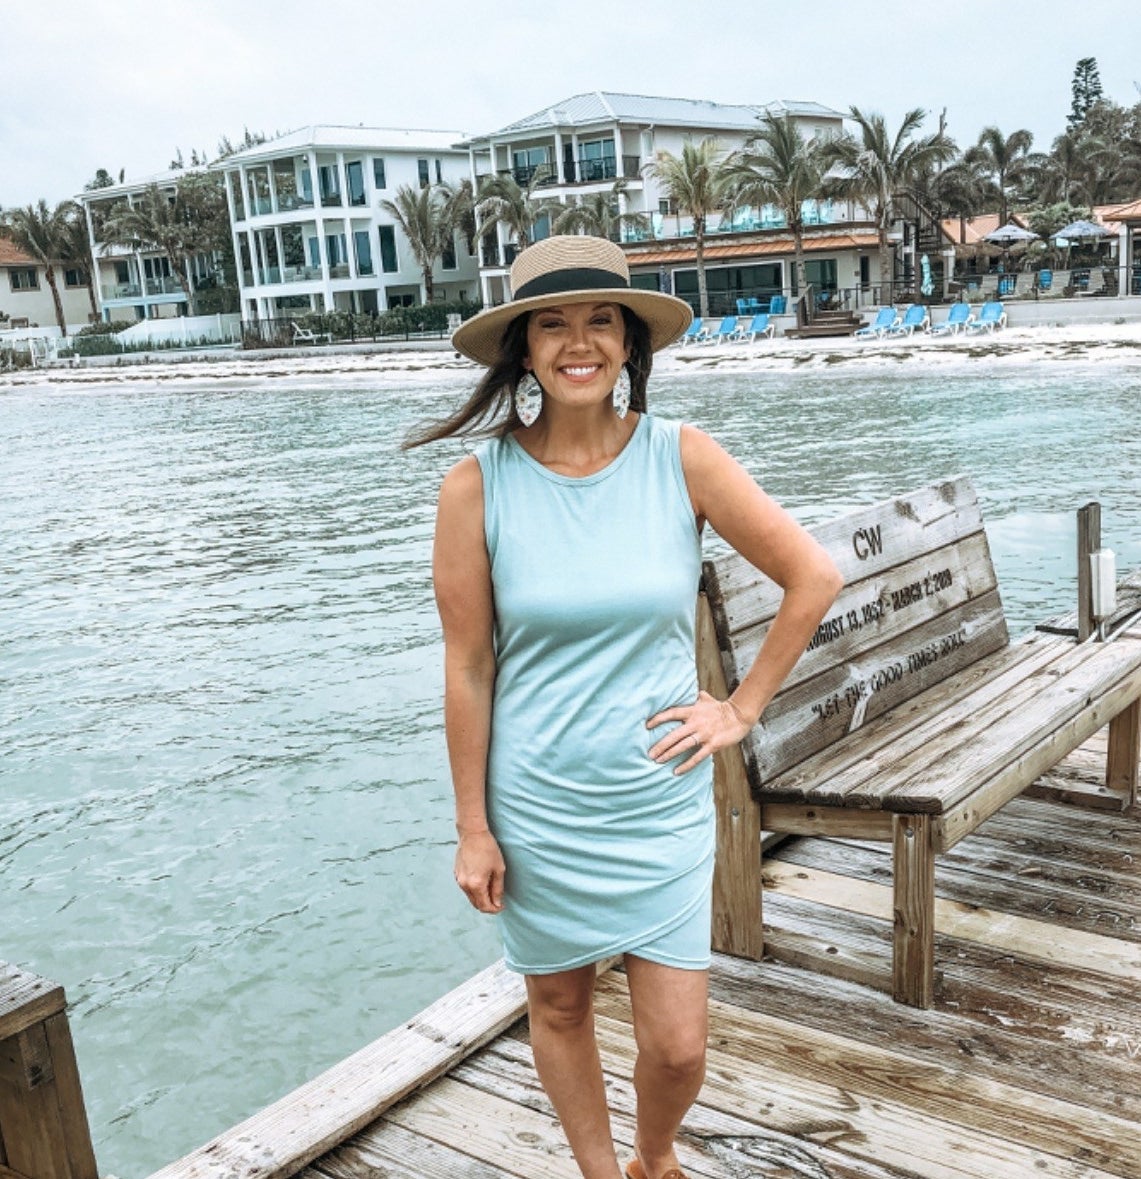 Reviewer posing in the light blue dress on pier